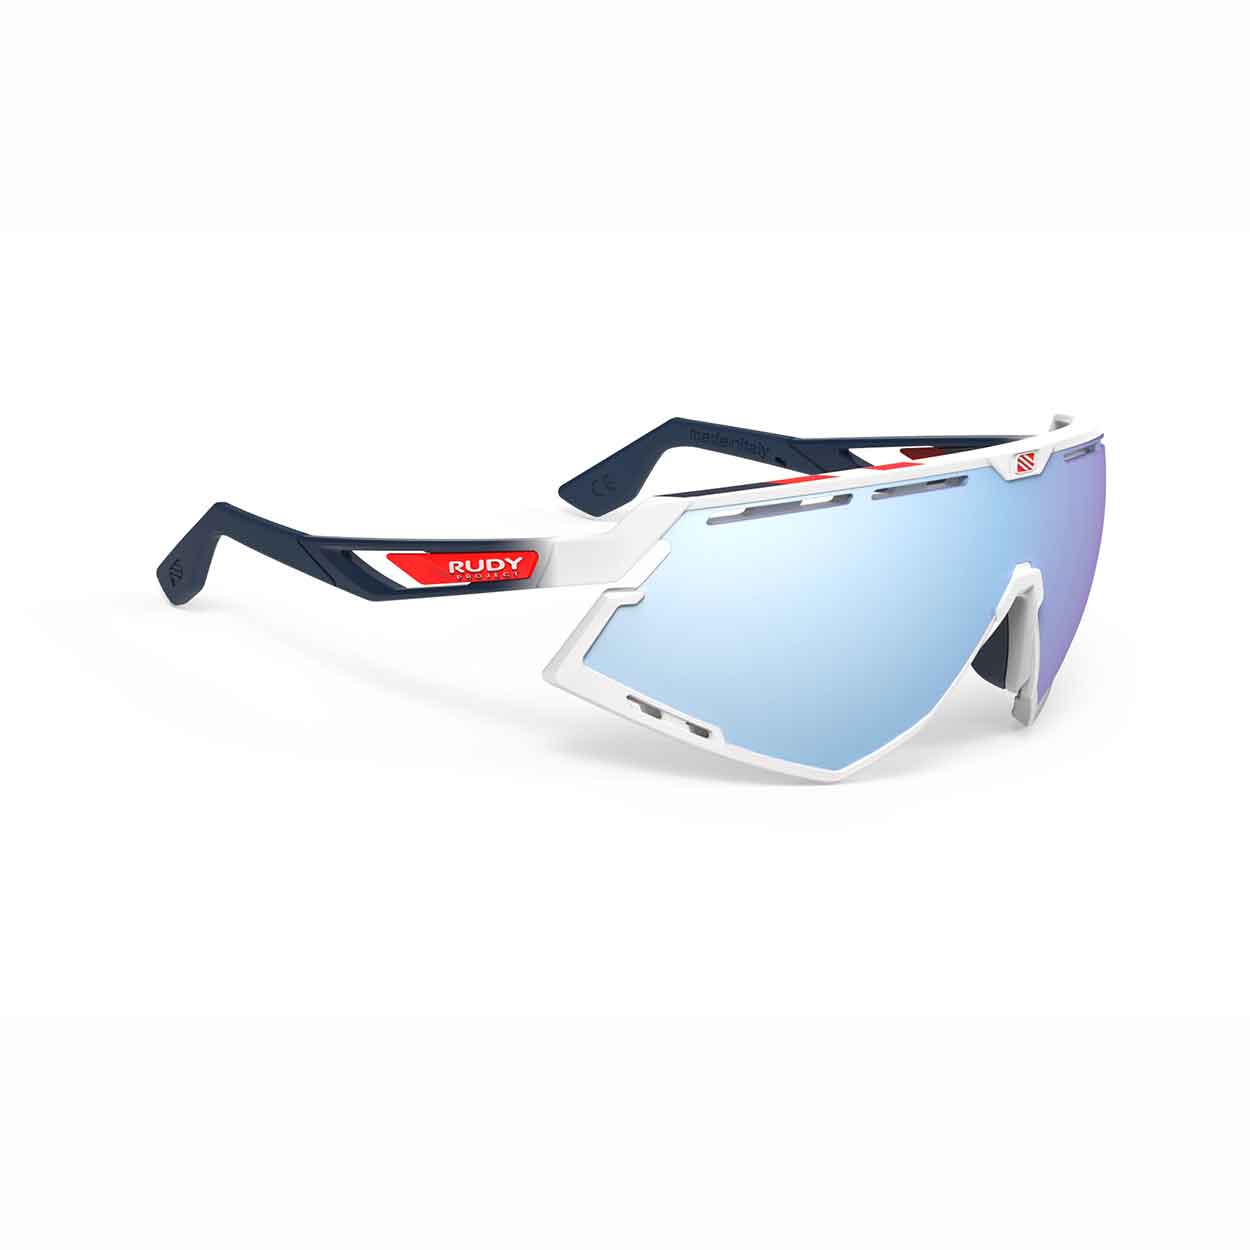 SP526869-0020 White Gloss - Fade Blue - Blue Red Stripes - Bumpers White / Multilaser Ice